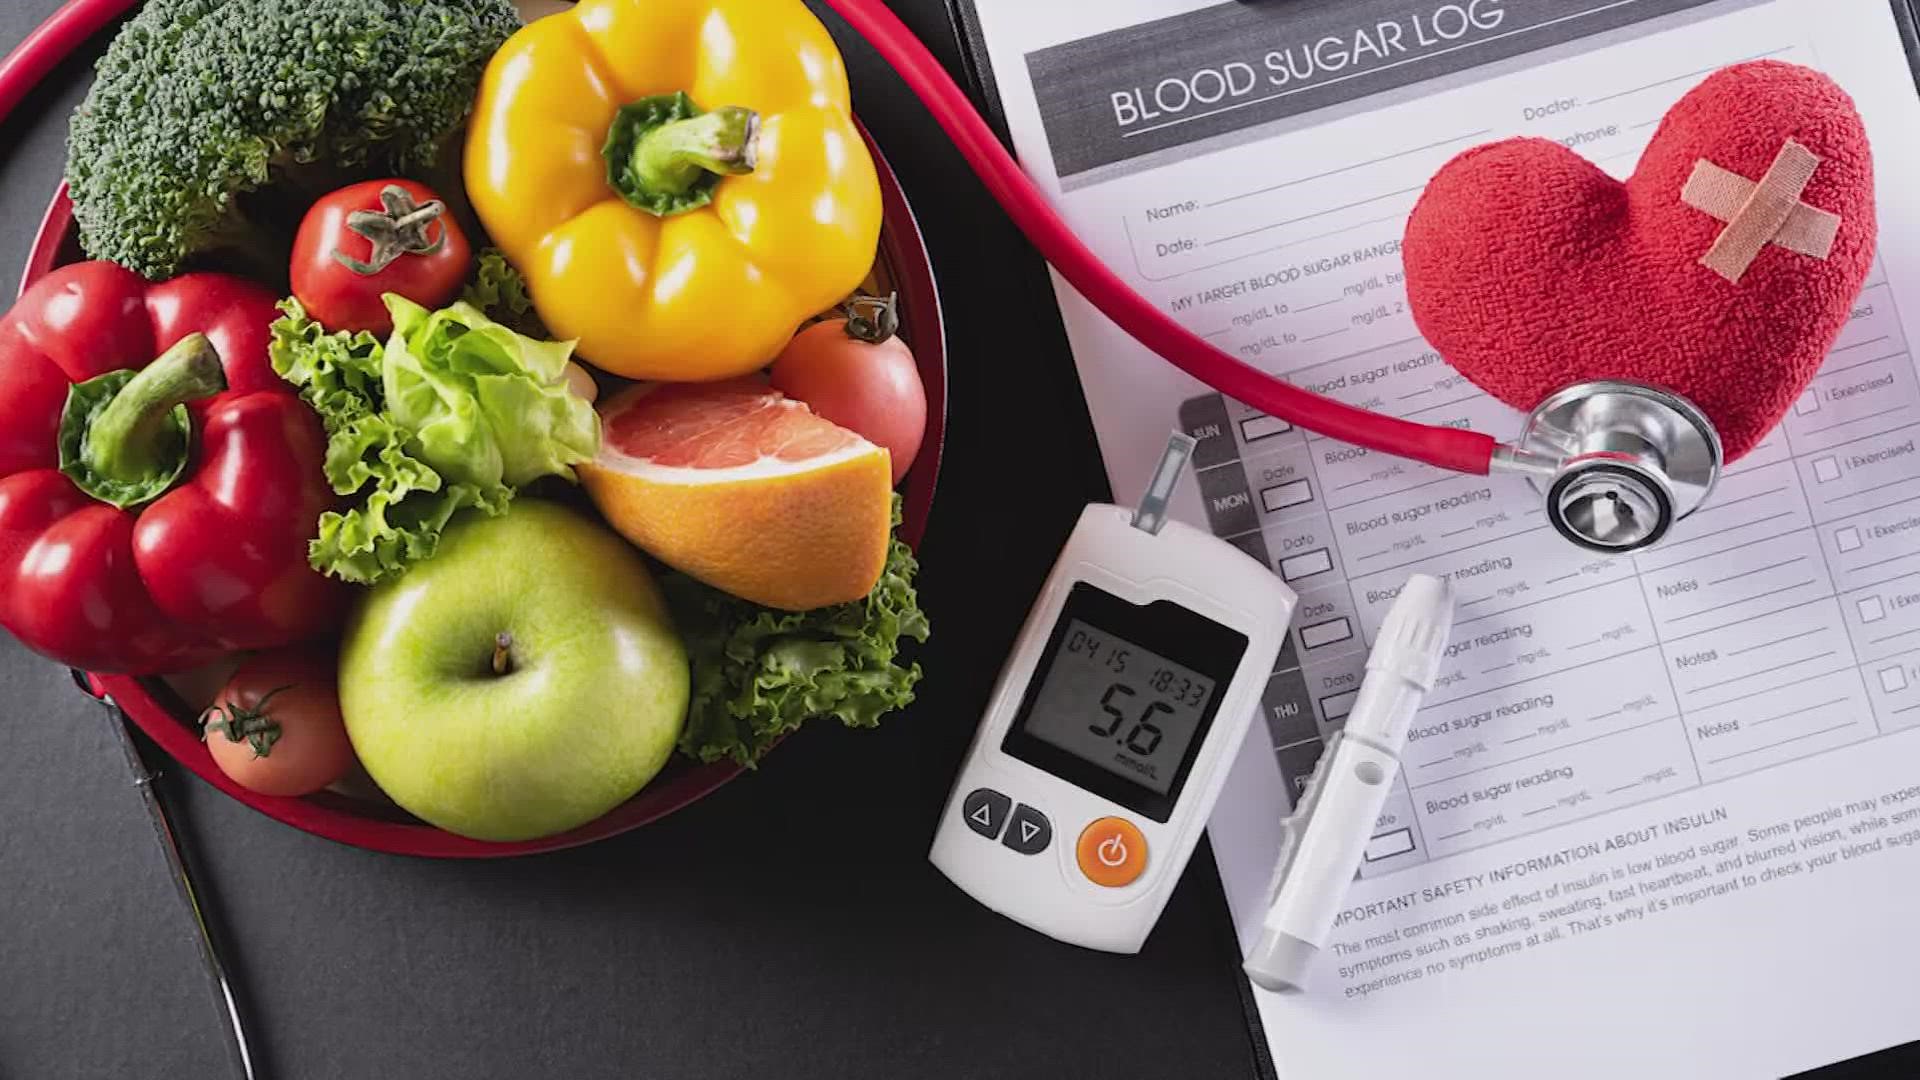 It's hard to stay healthy during the holiday season. One endocrinologist has tips on how diabetics can maintain their blood sugar.